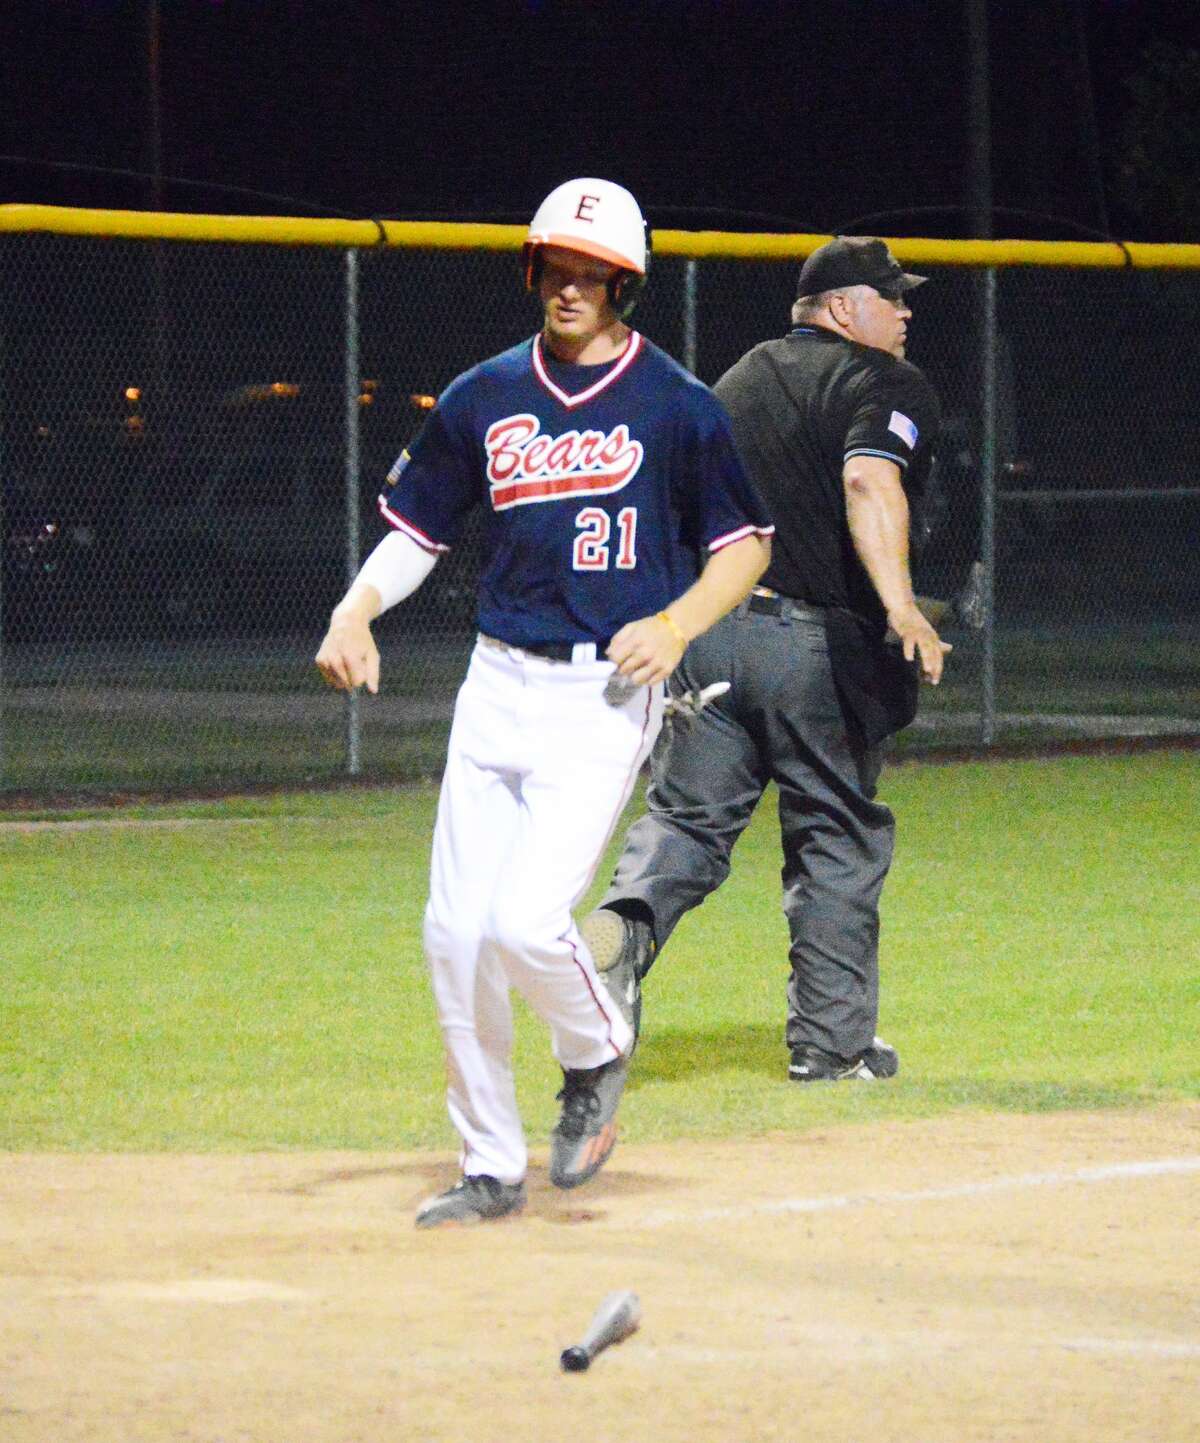 Andrew Yancik prepares to cross home plate for his team’s only run of the game in the second inning of Wednesday’s game in Belleville.